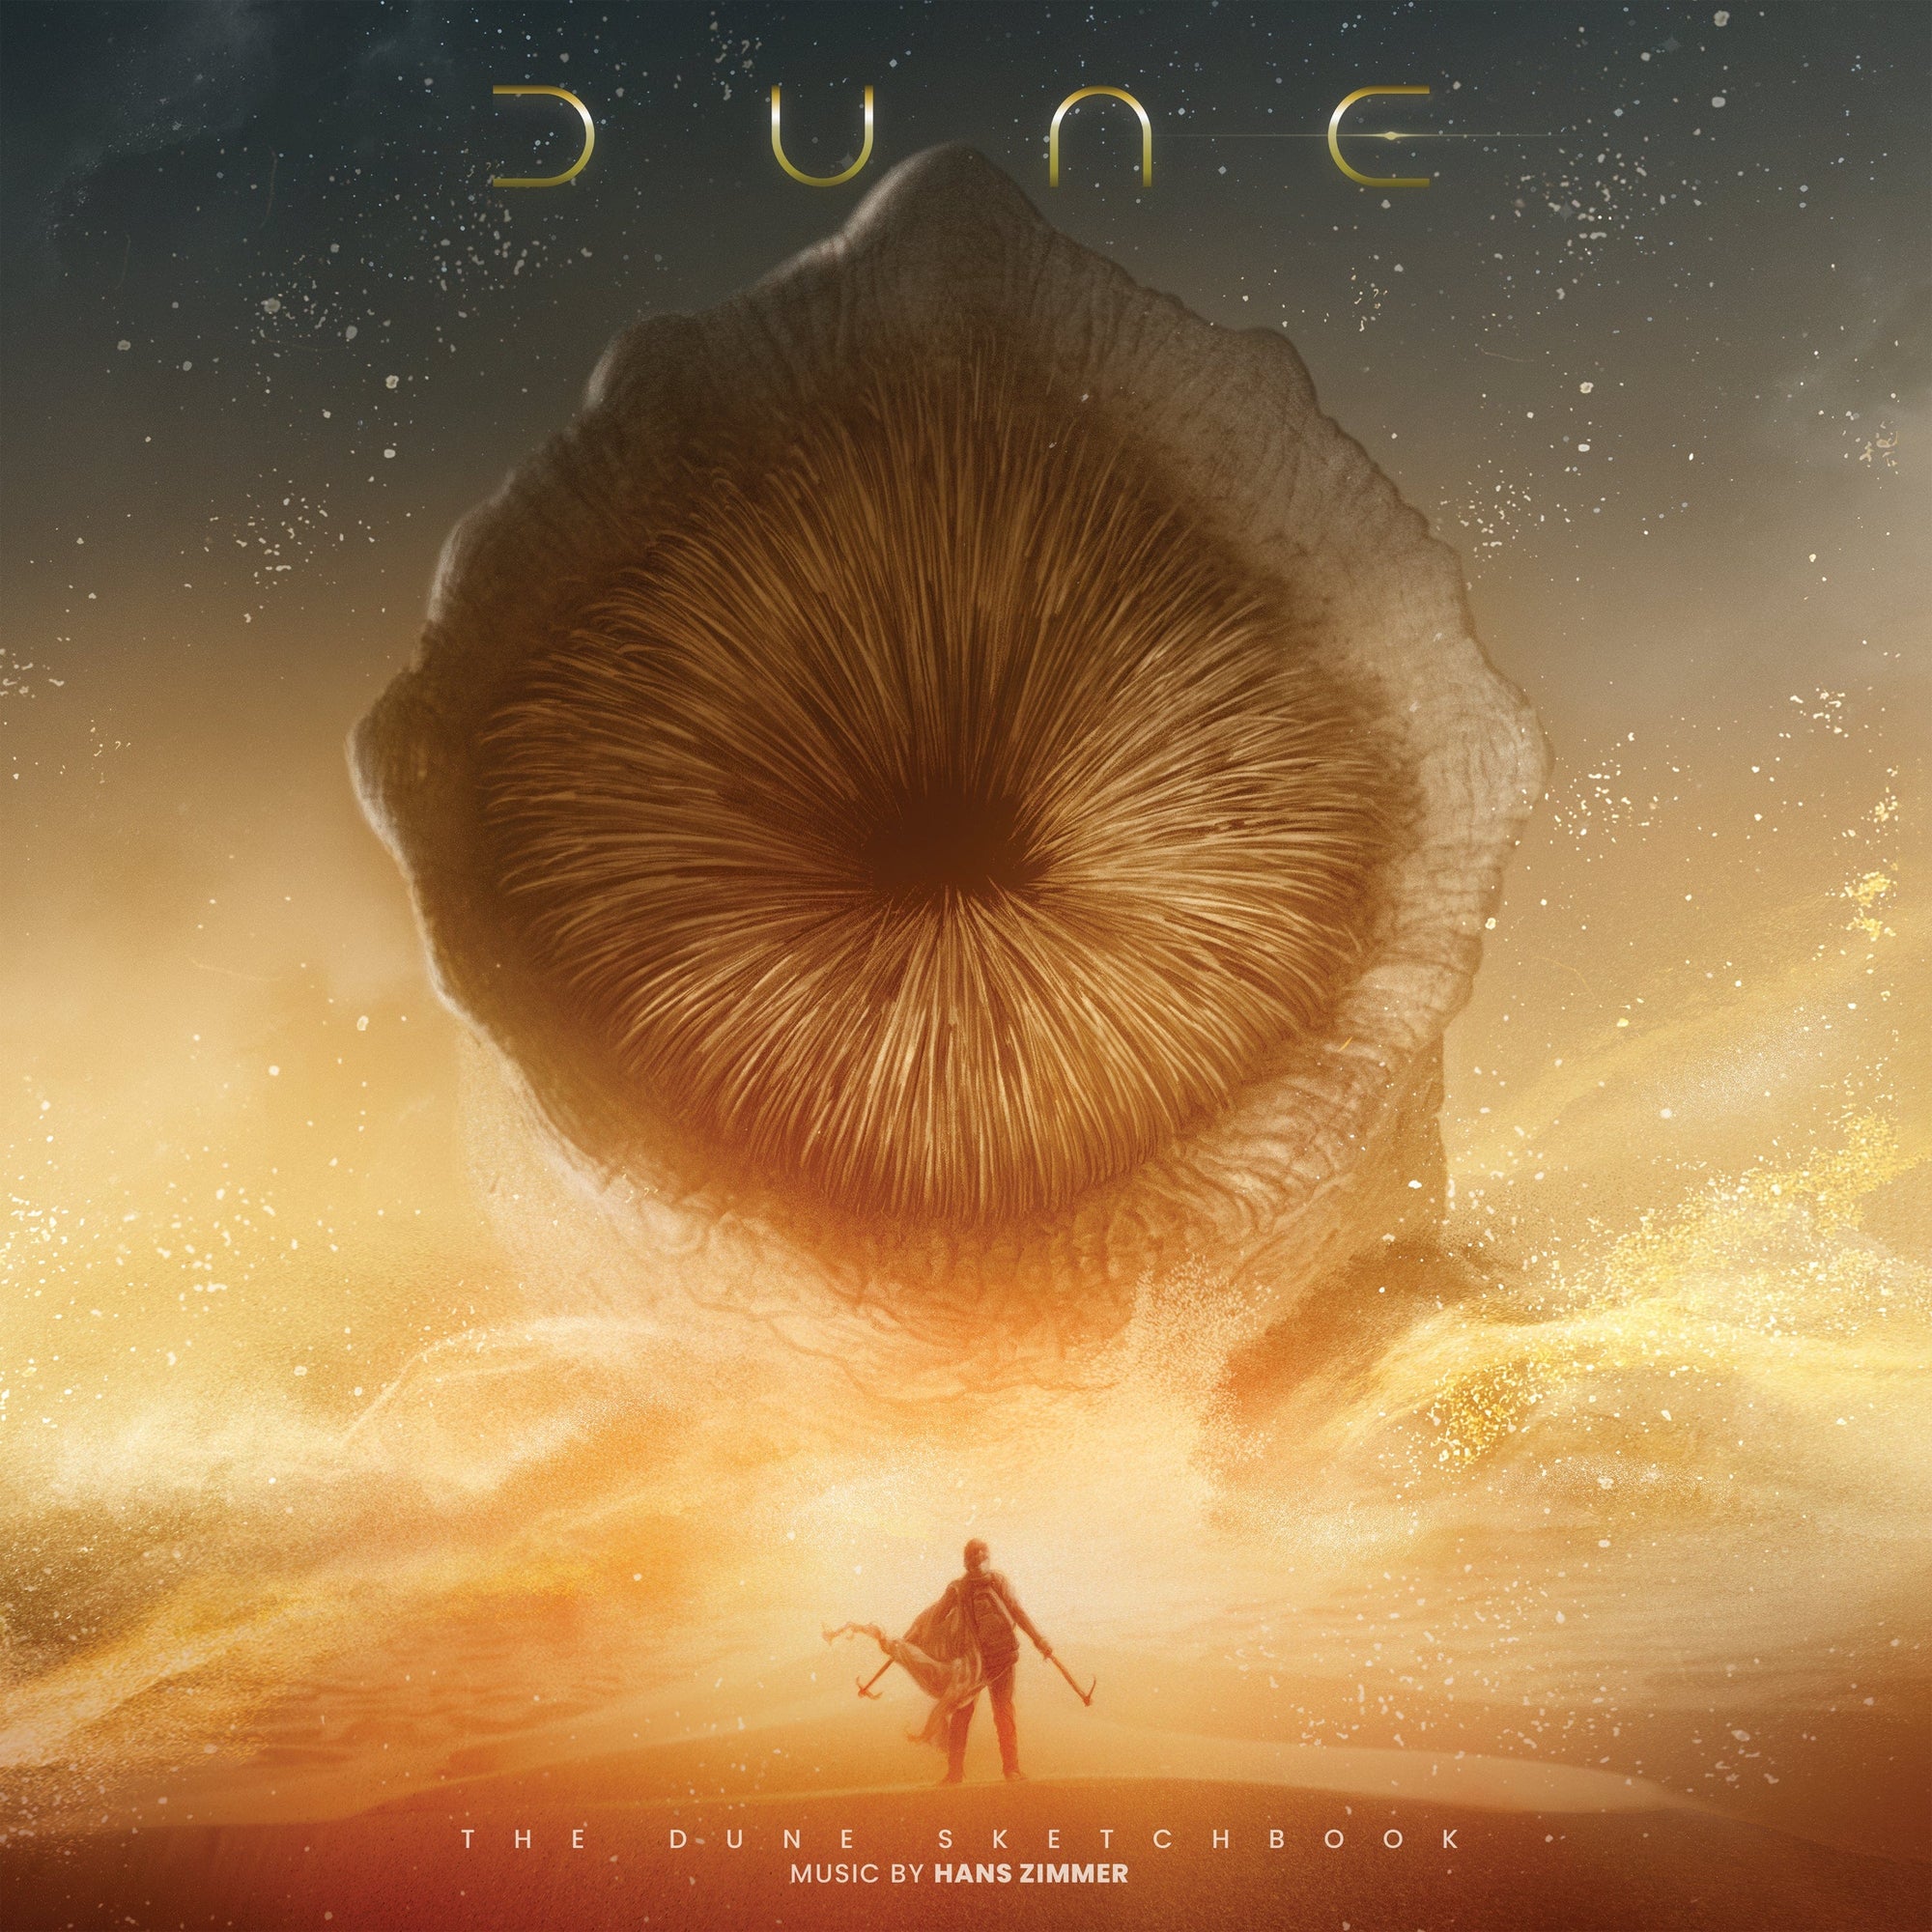 The Dune Sketchbook - Music from the Soundtrack 3XLP – Mondo